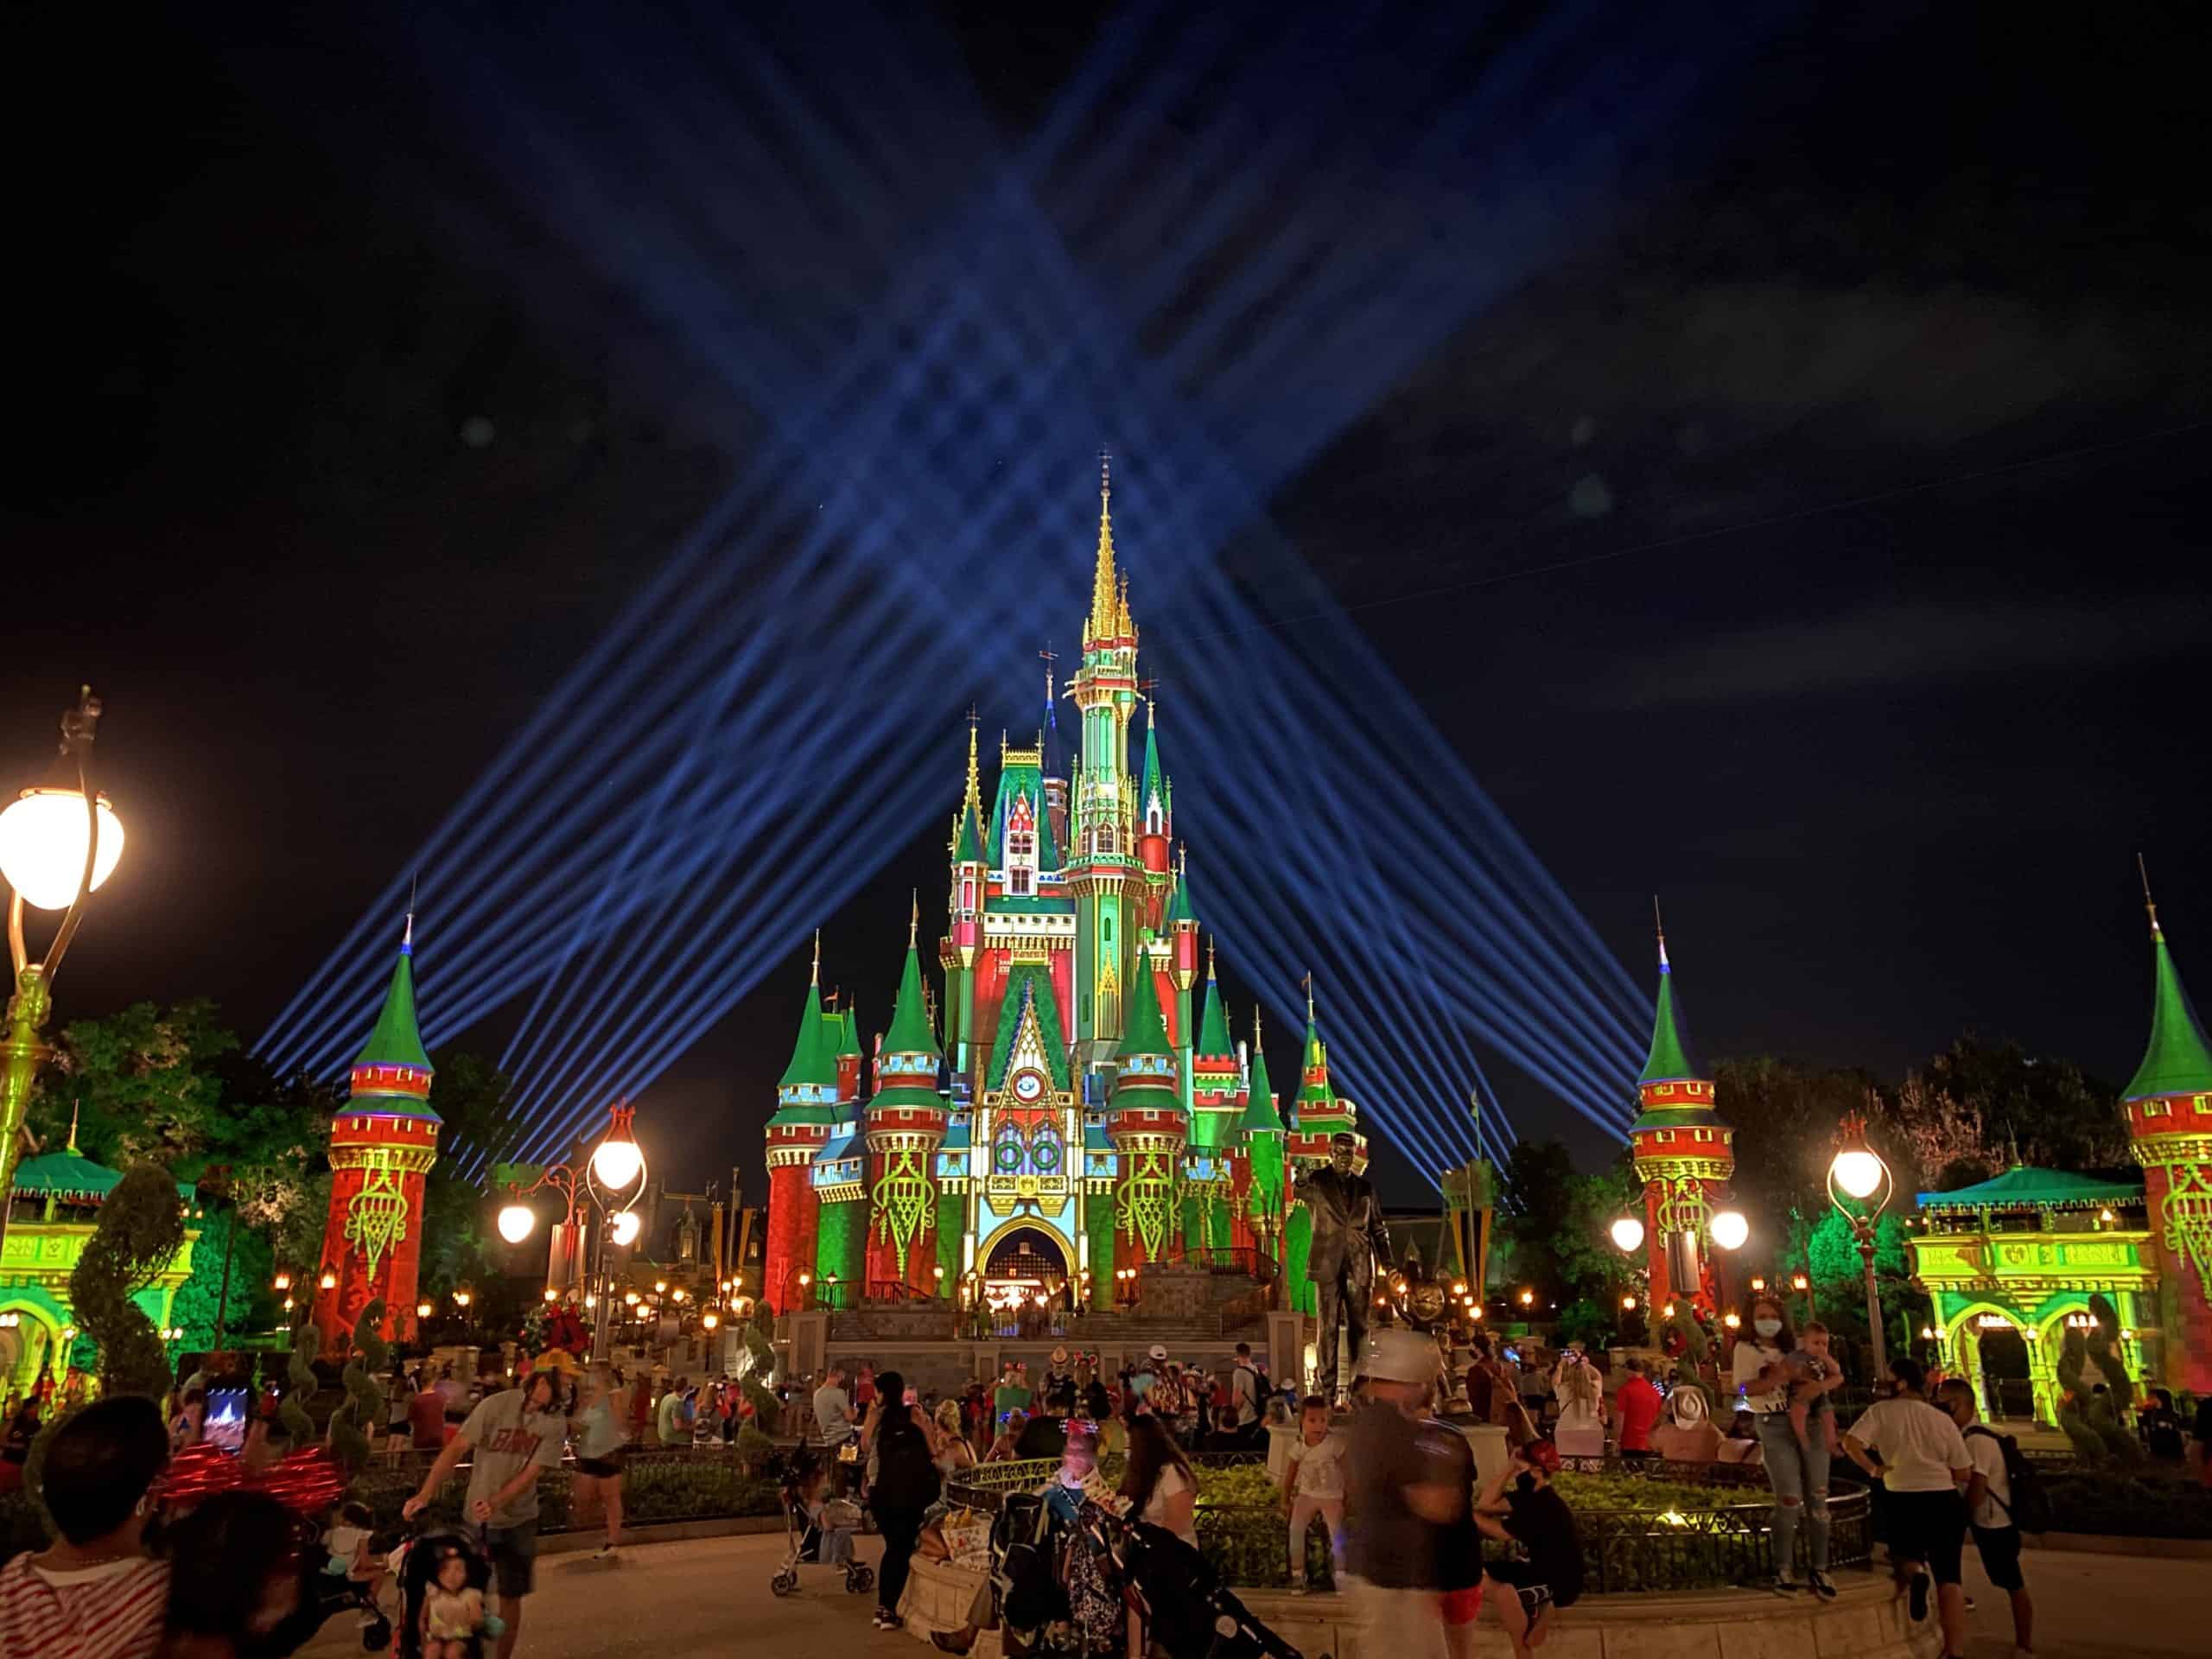 What to know if you go to Walt Disney World during the 2020 holiday season